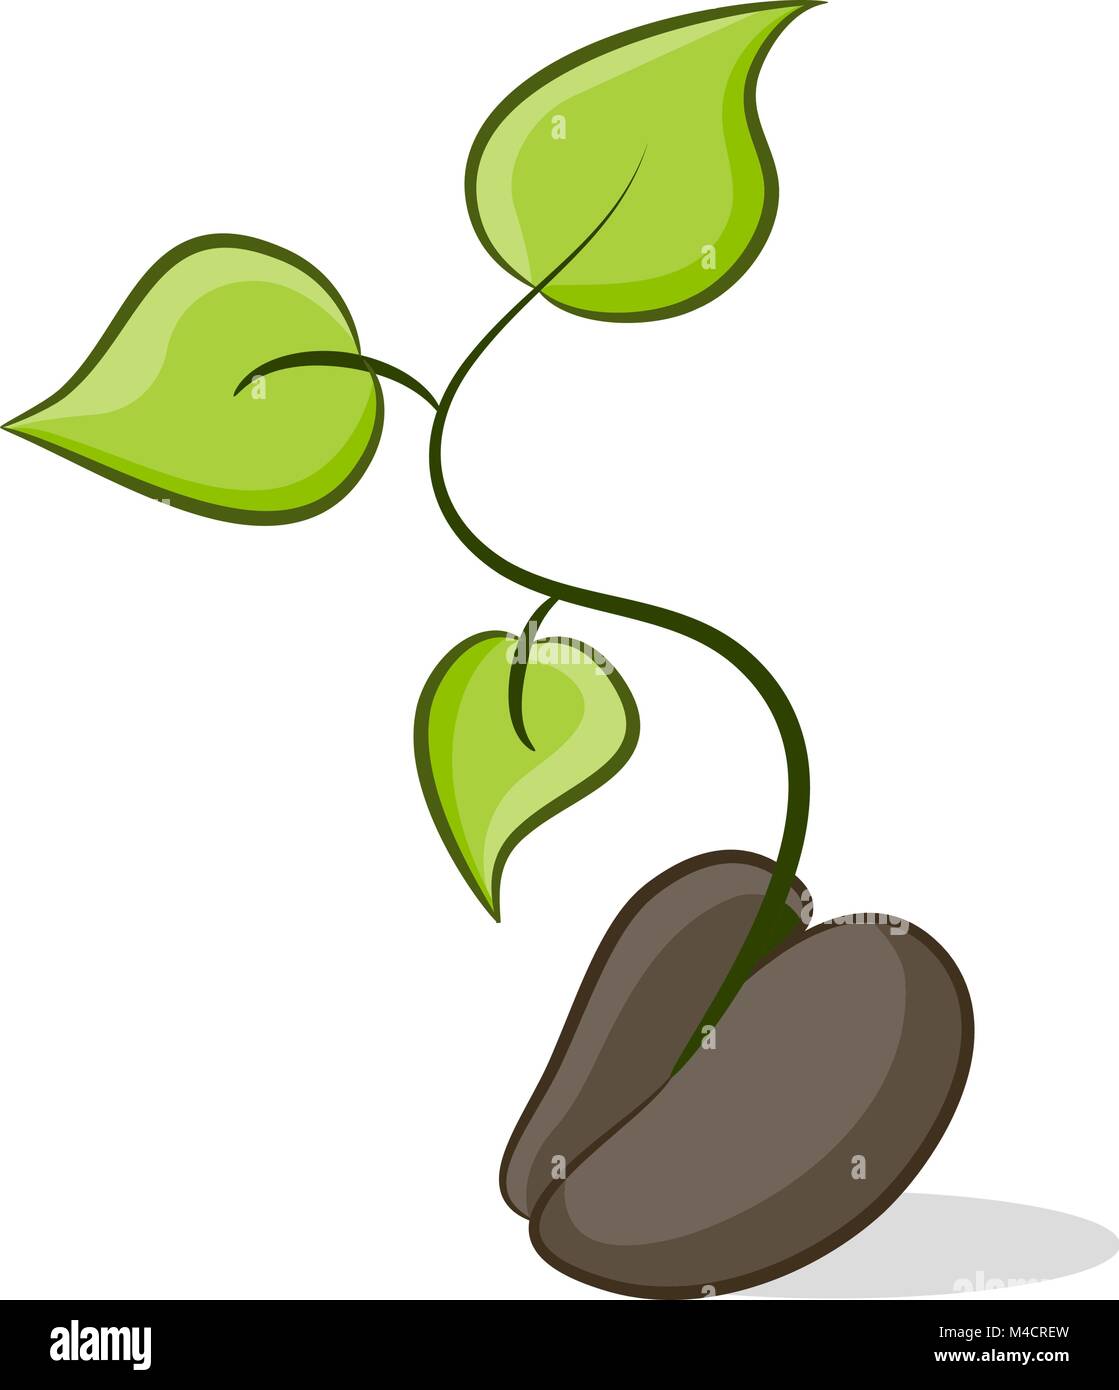 An image of a seed that is growing plant life. Stock Vector